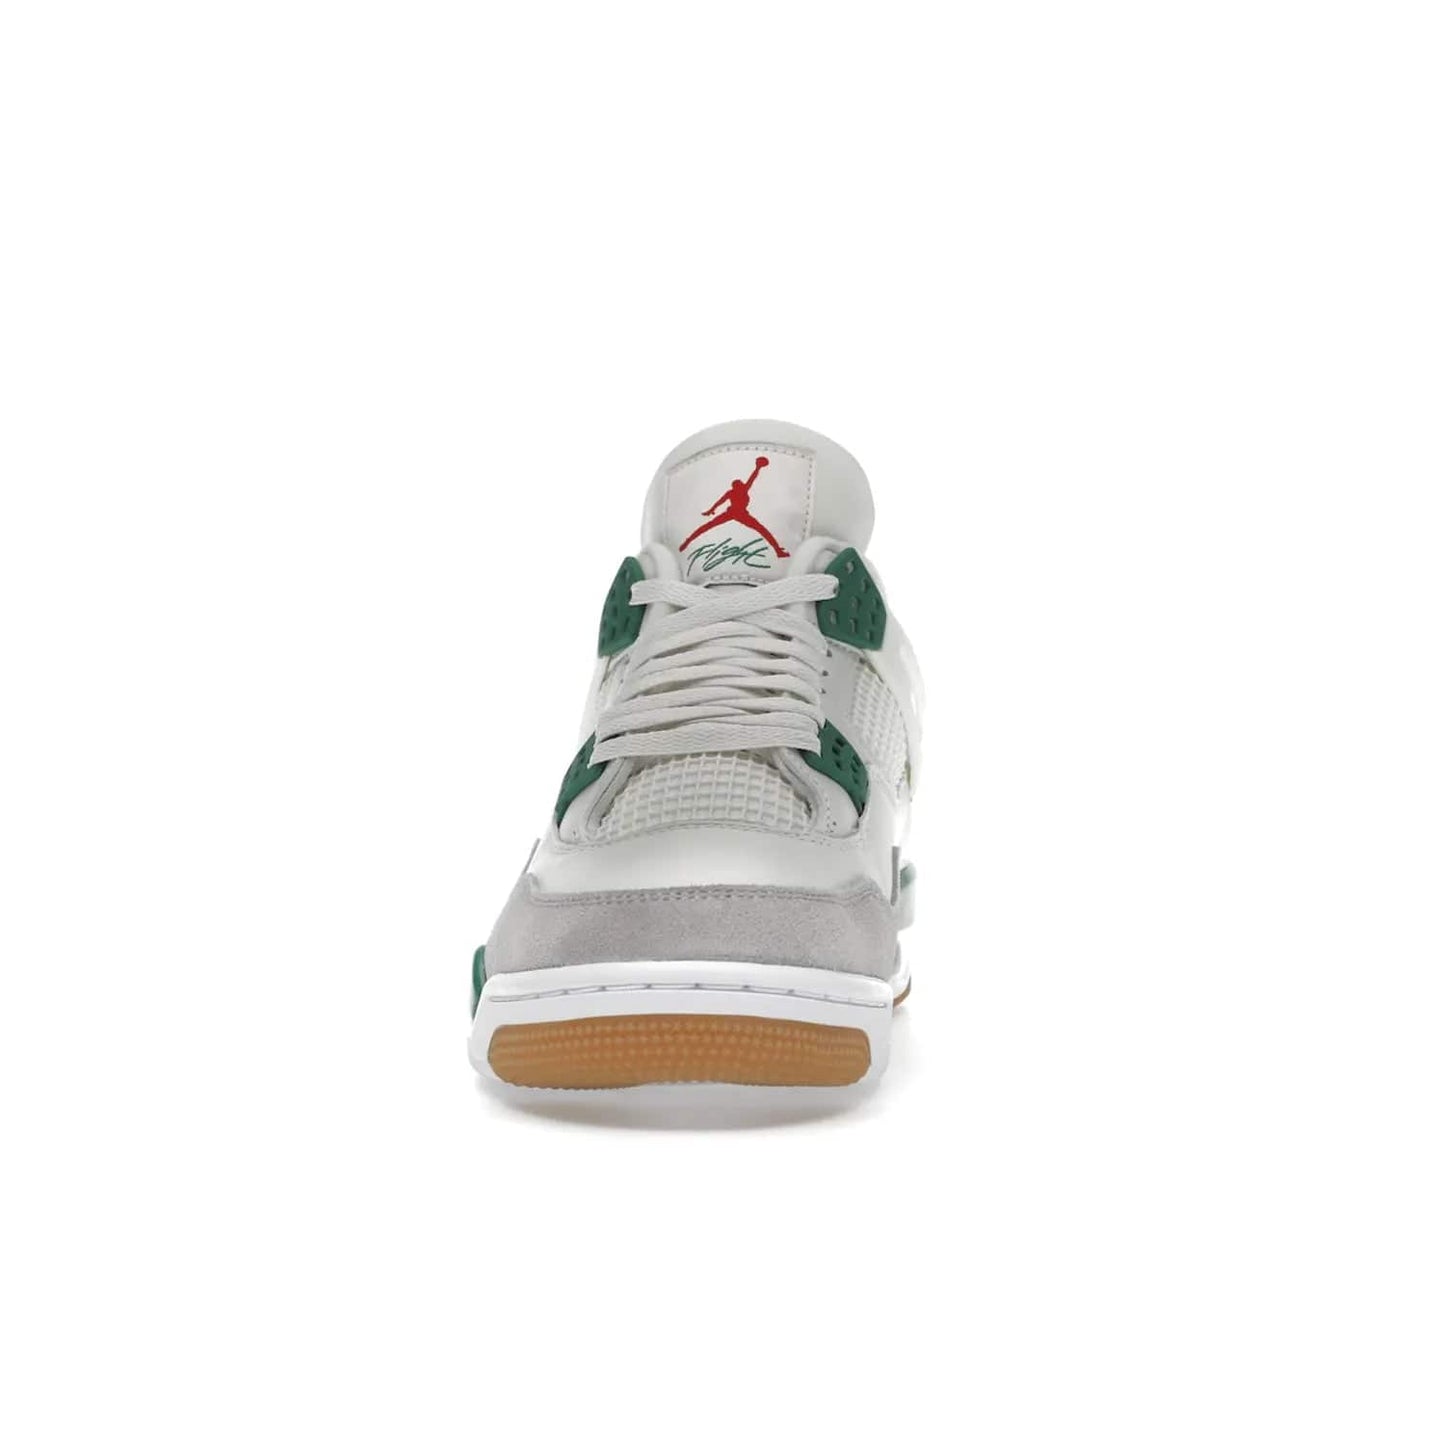 Jordan 4 Retro SB Pine Green - Image 11 - Only at www.BallersClubKickz.com - A white leather upper combined with a Neutral Grey suede mudguard gives this limited Air Jordan 4 Retro SB Pine Green sneaker its unmistakable style. Released March 20, 2023, the Jordan 4 Retro SB features a white and Pine Green midsole plus a red air unit with a gum outsole for grip. The perfect blend of Nike SB skateboarding and Jordan 4 classic design.